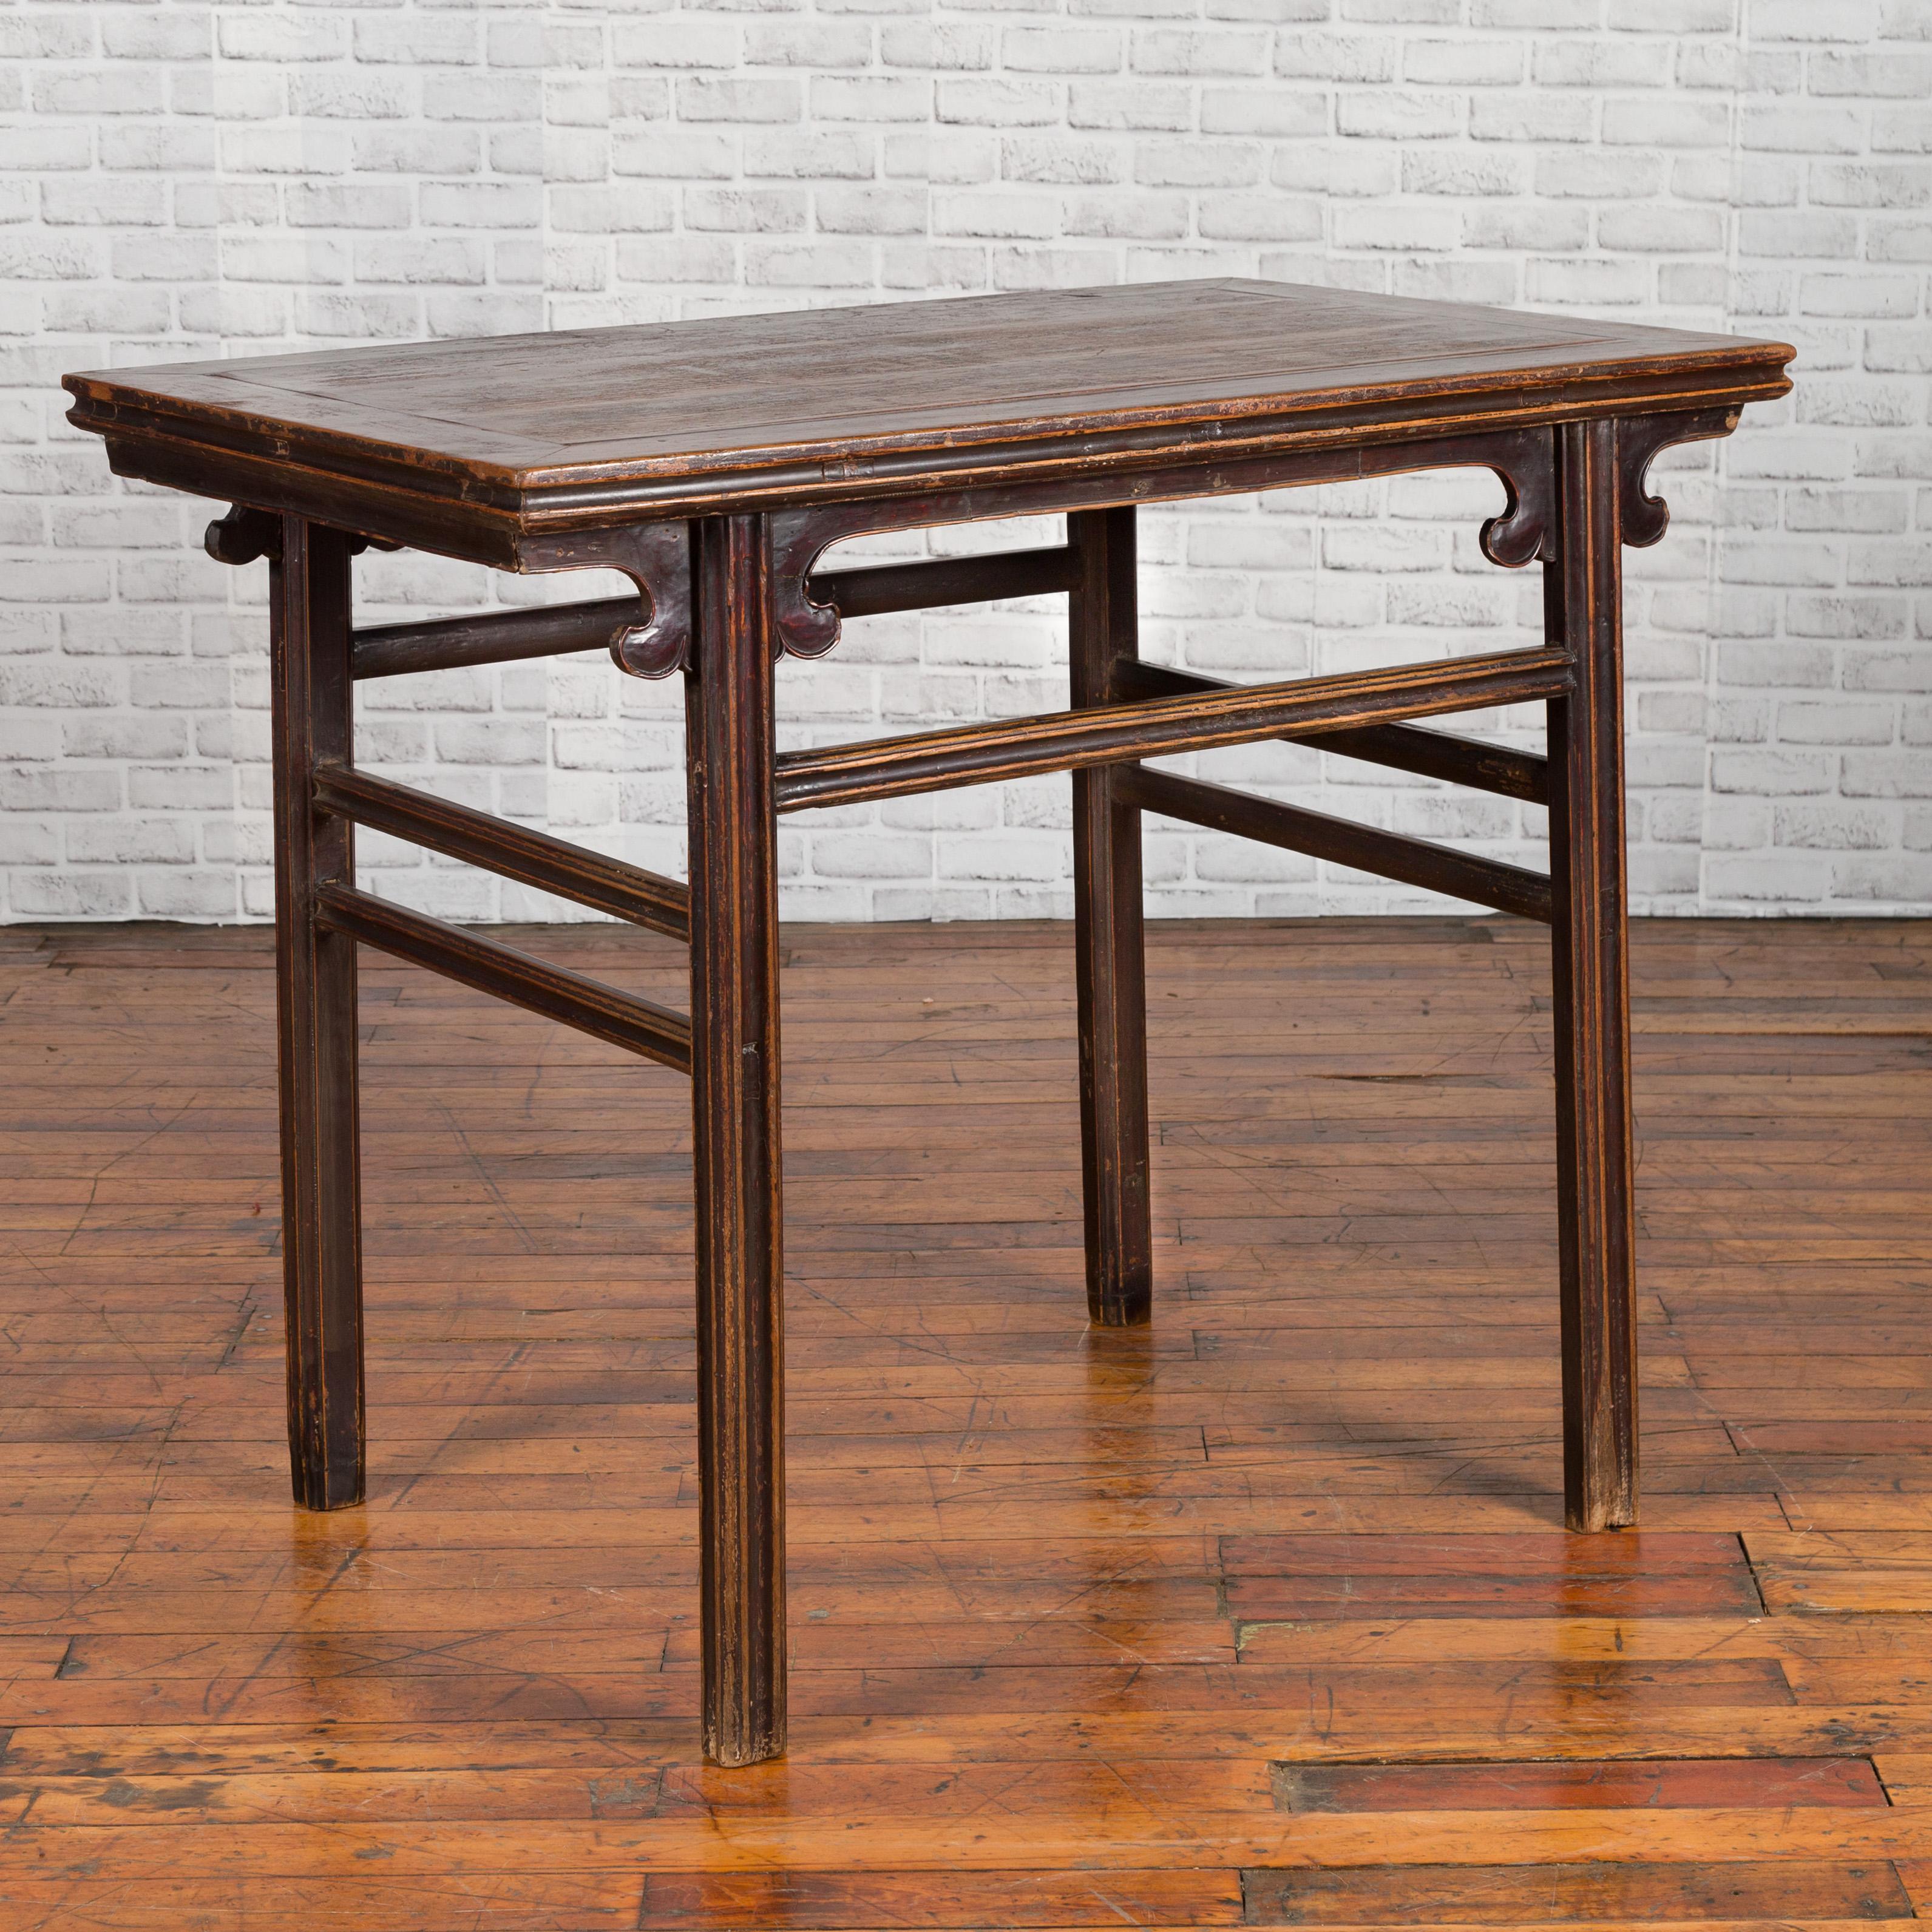 A Chinese Ming Dynasty style wine table from the 19th century, with carved spandrels and straight legs. Created in China during the Qing Dynasty, this antique wine table table features a rectangular top with central board, sitting above four